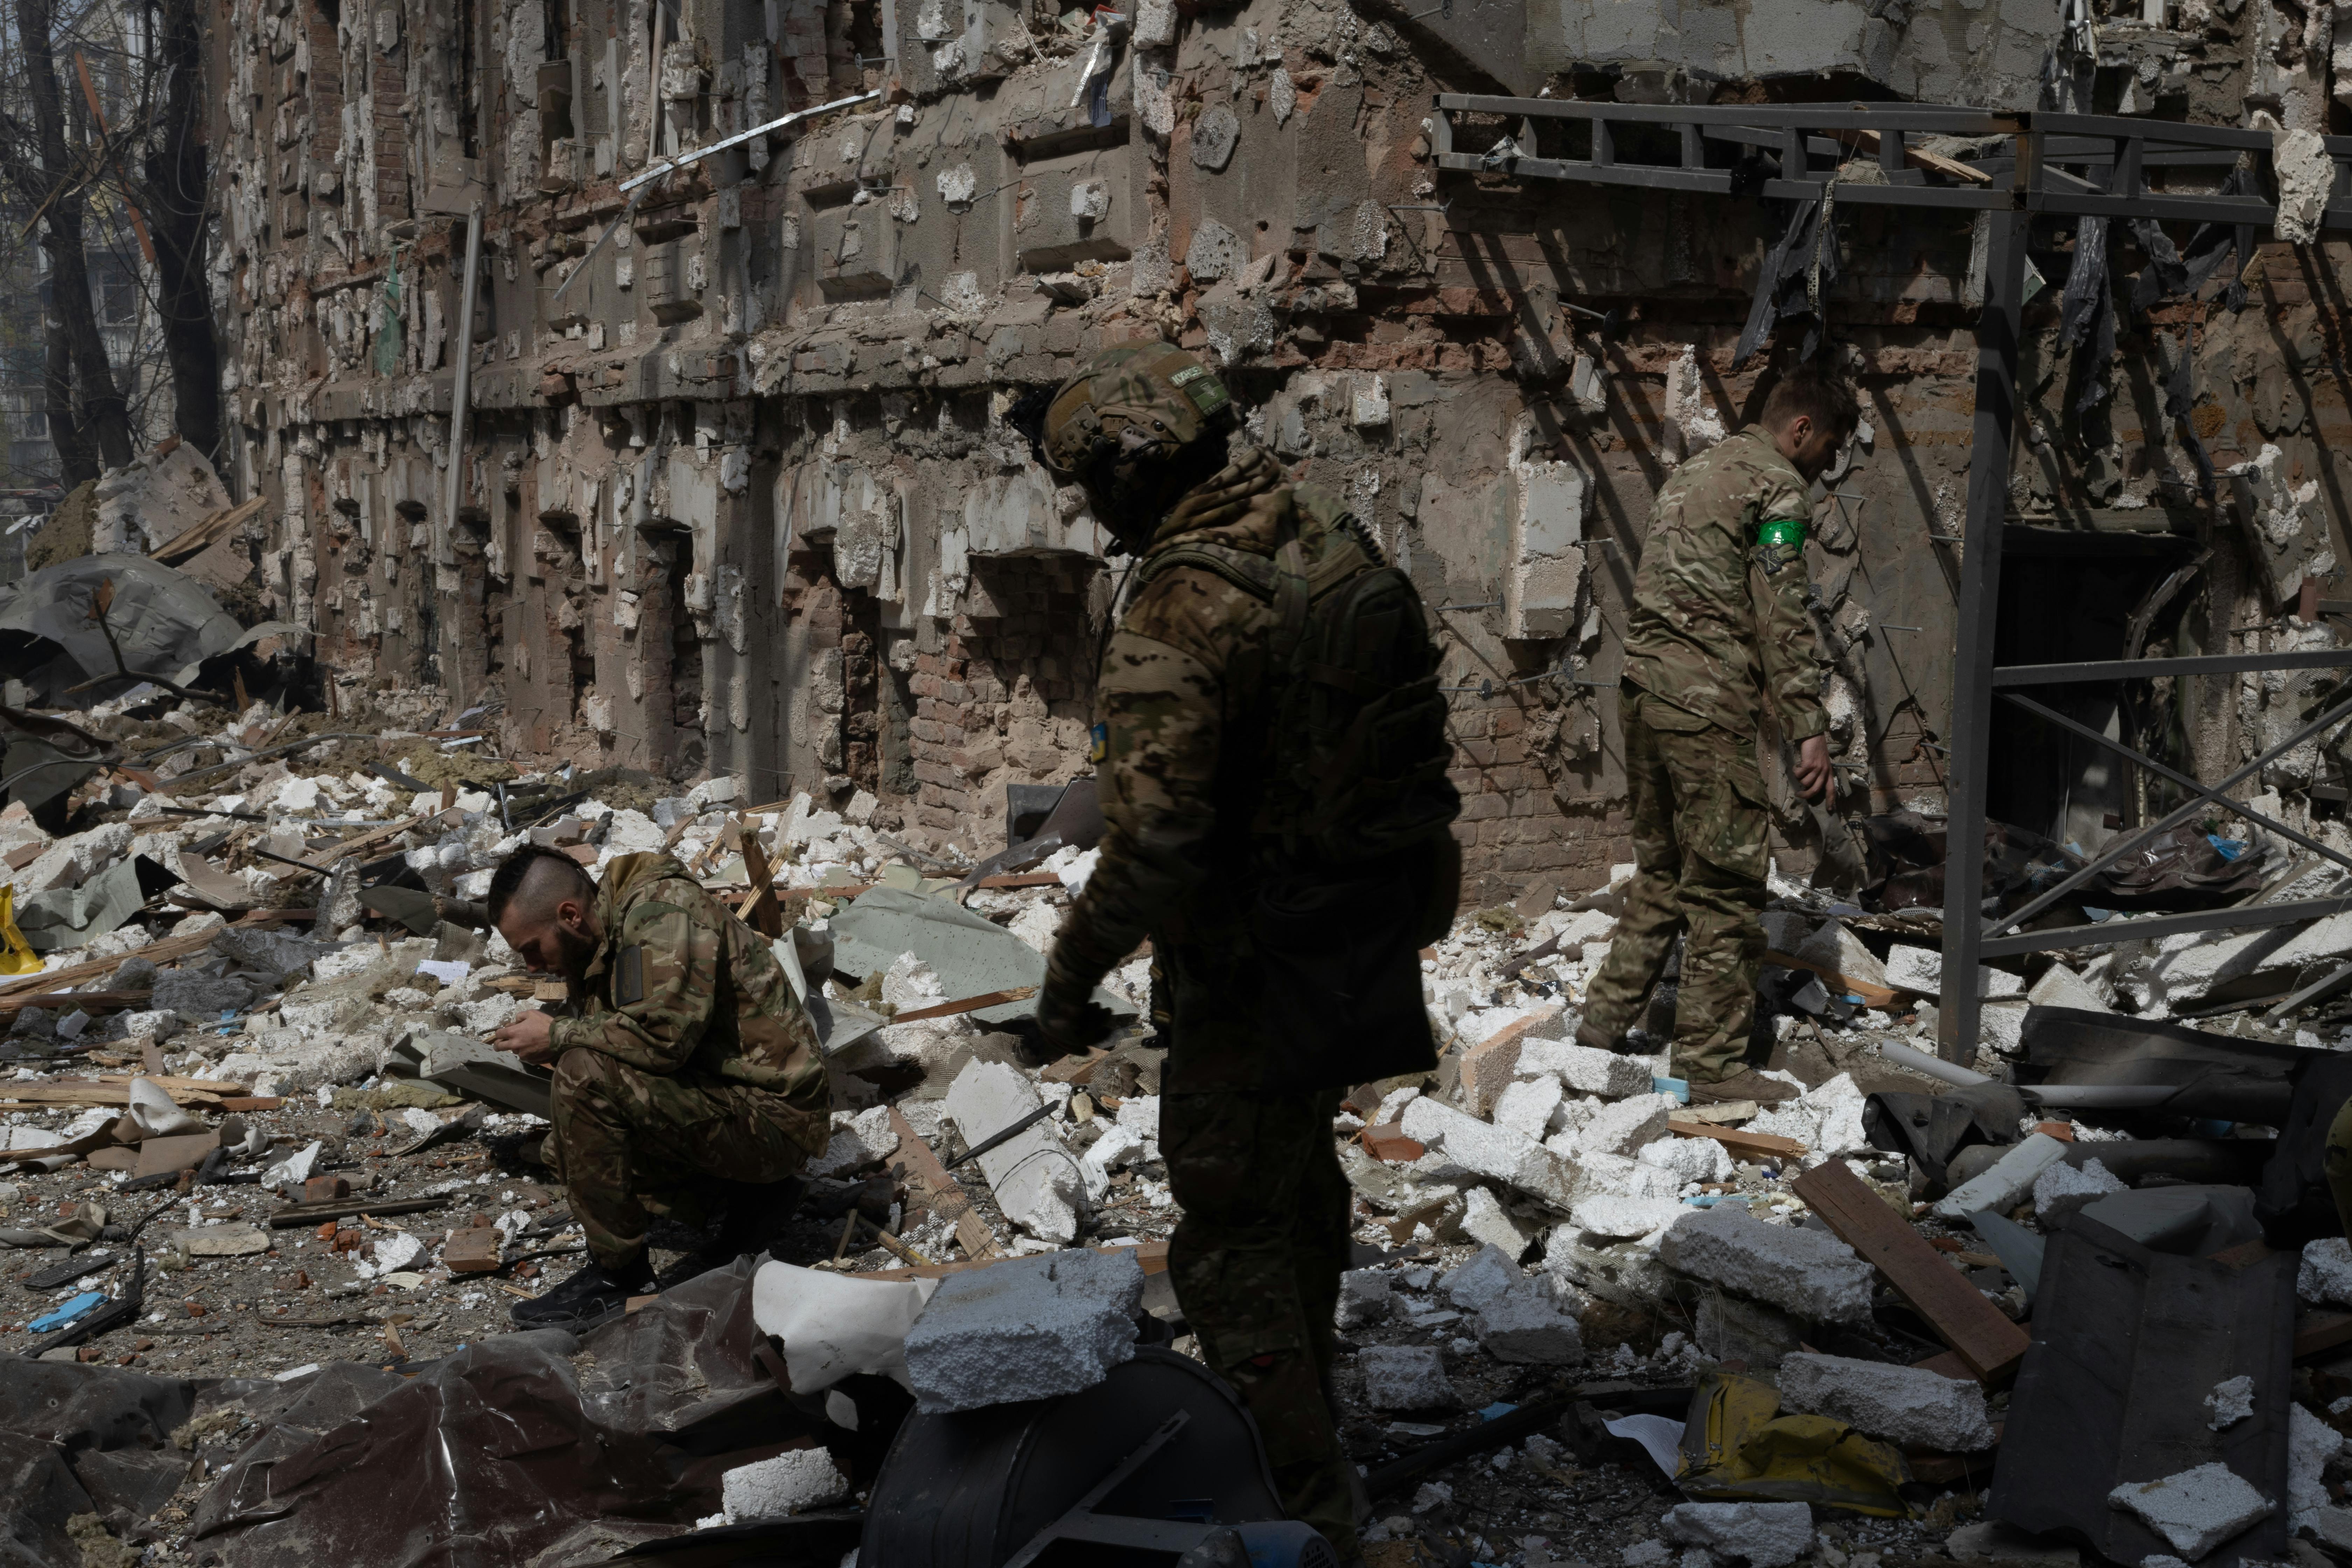 military personnel searching the wreckage